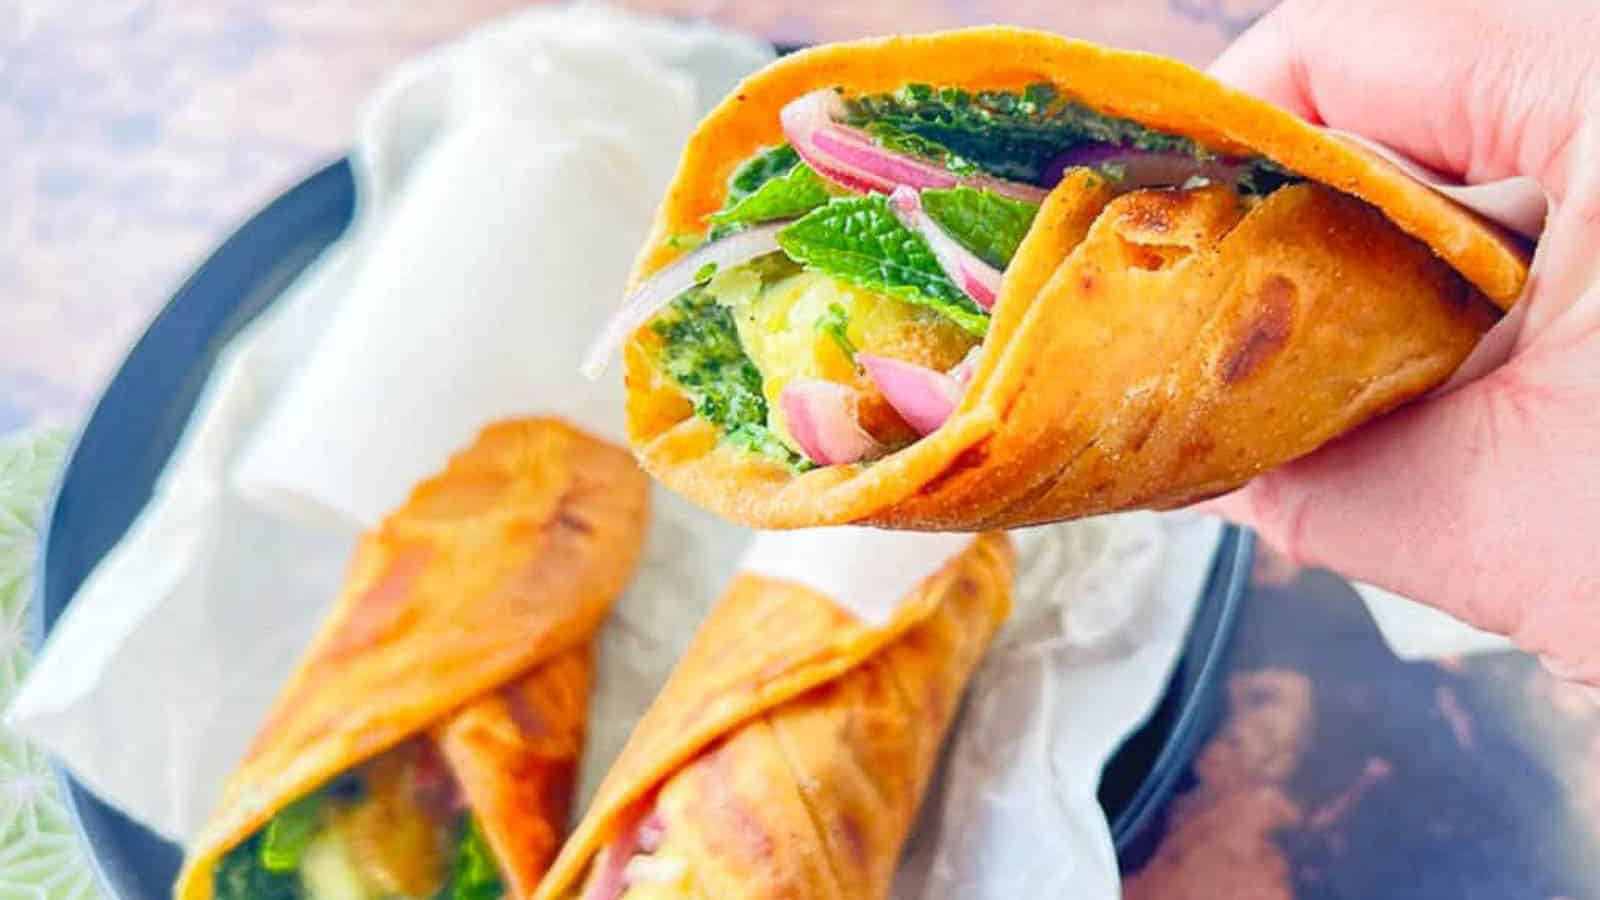 17 Sandwiches & Wraps To Satisfy Your Mid-day Hunger